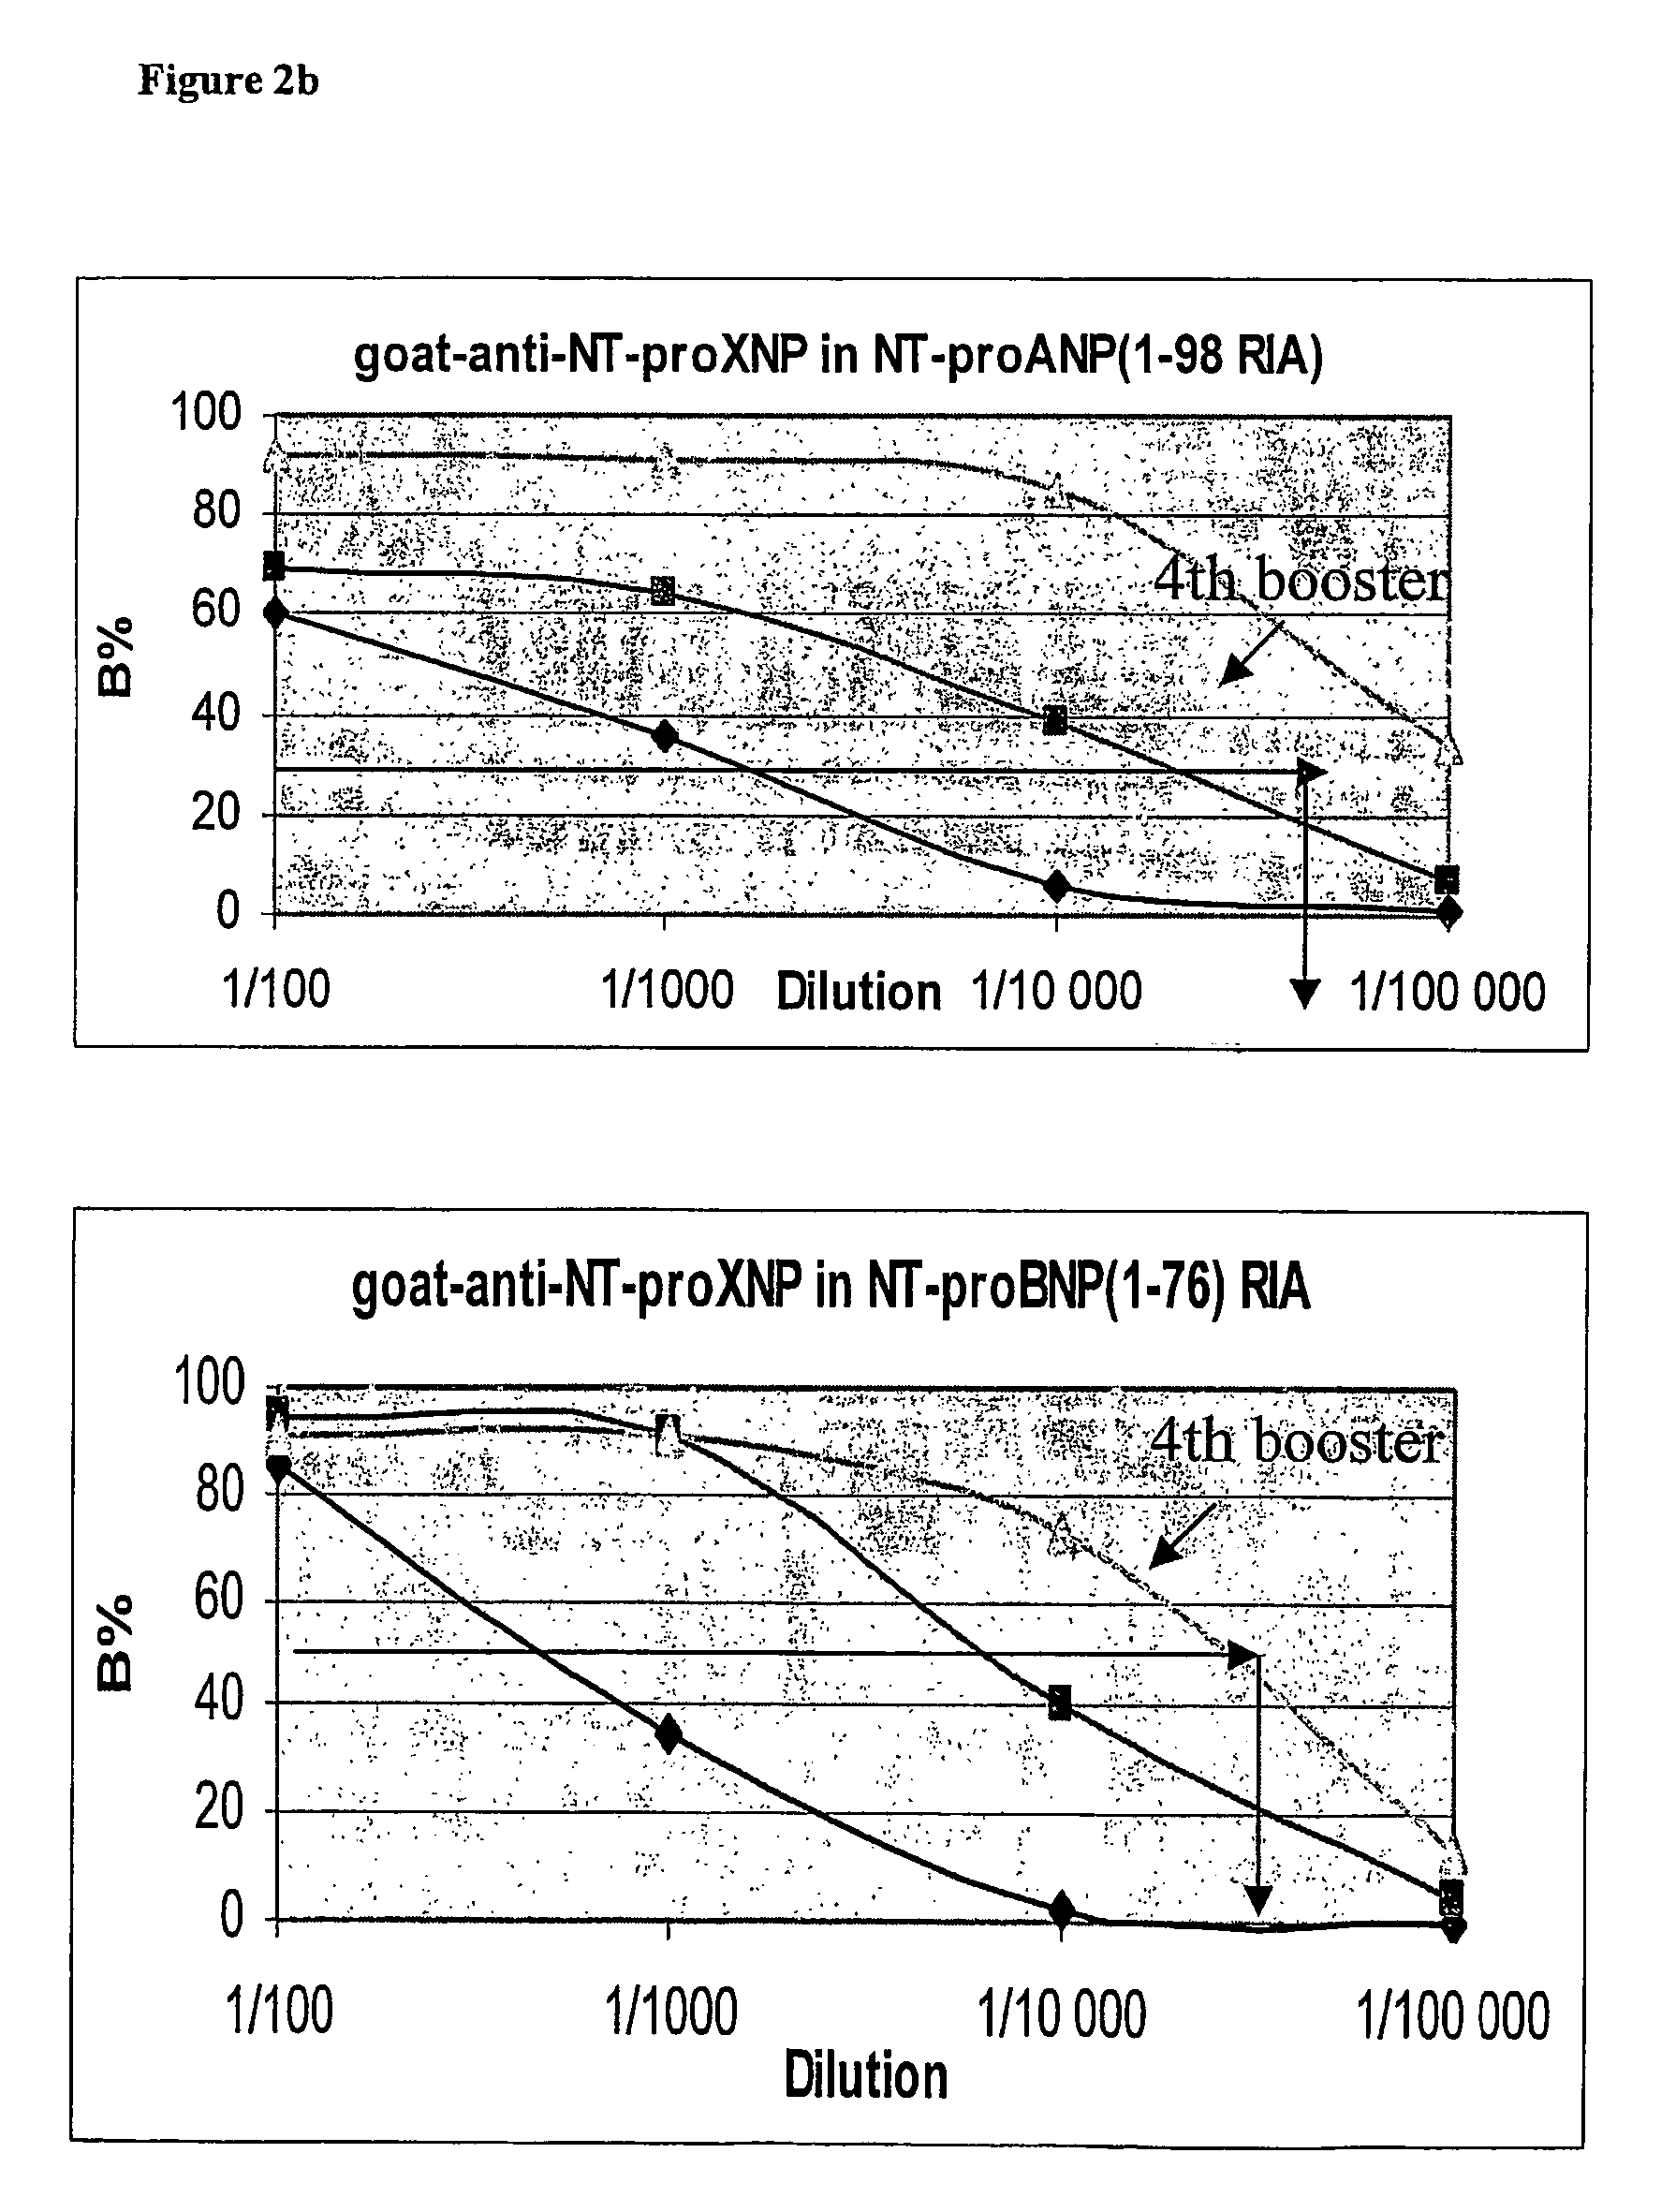 Methods of determination of activation or inactivation of atrial natriuretic peptide (ANP) and brain natriuretic peptide (BNP) hormonal systems